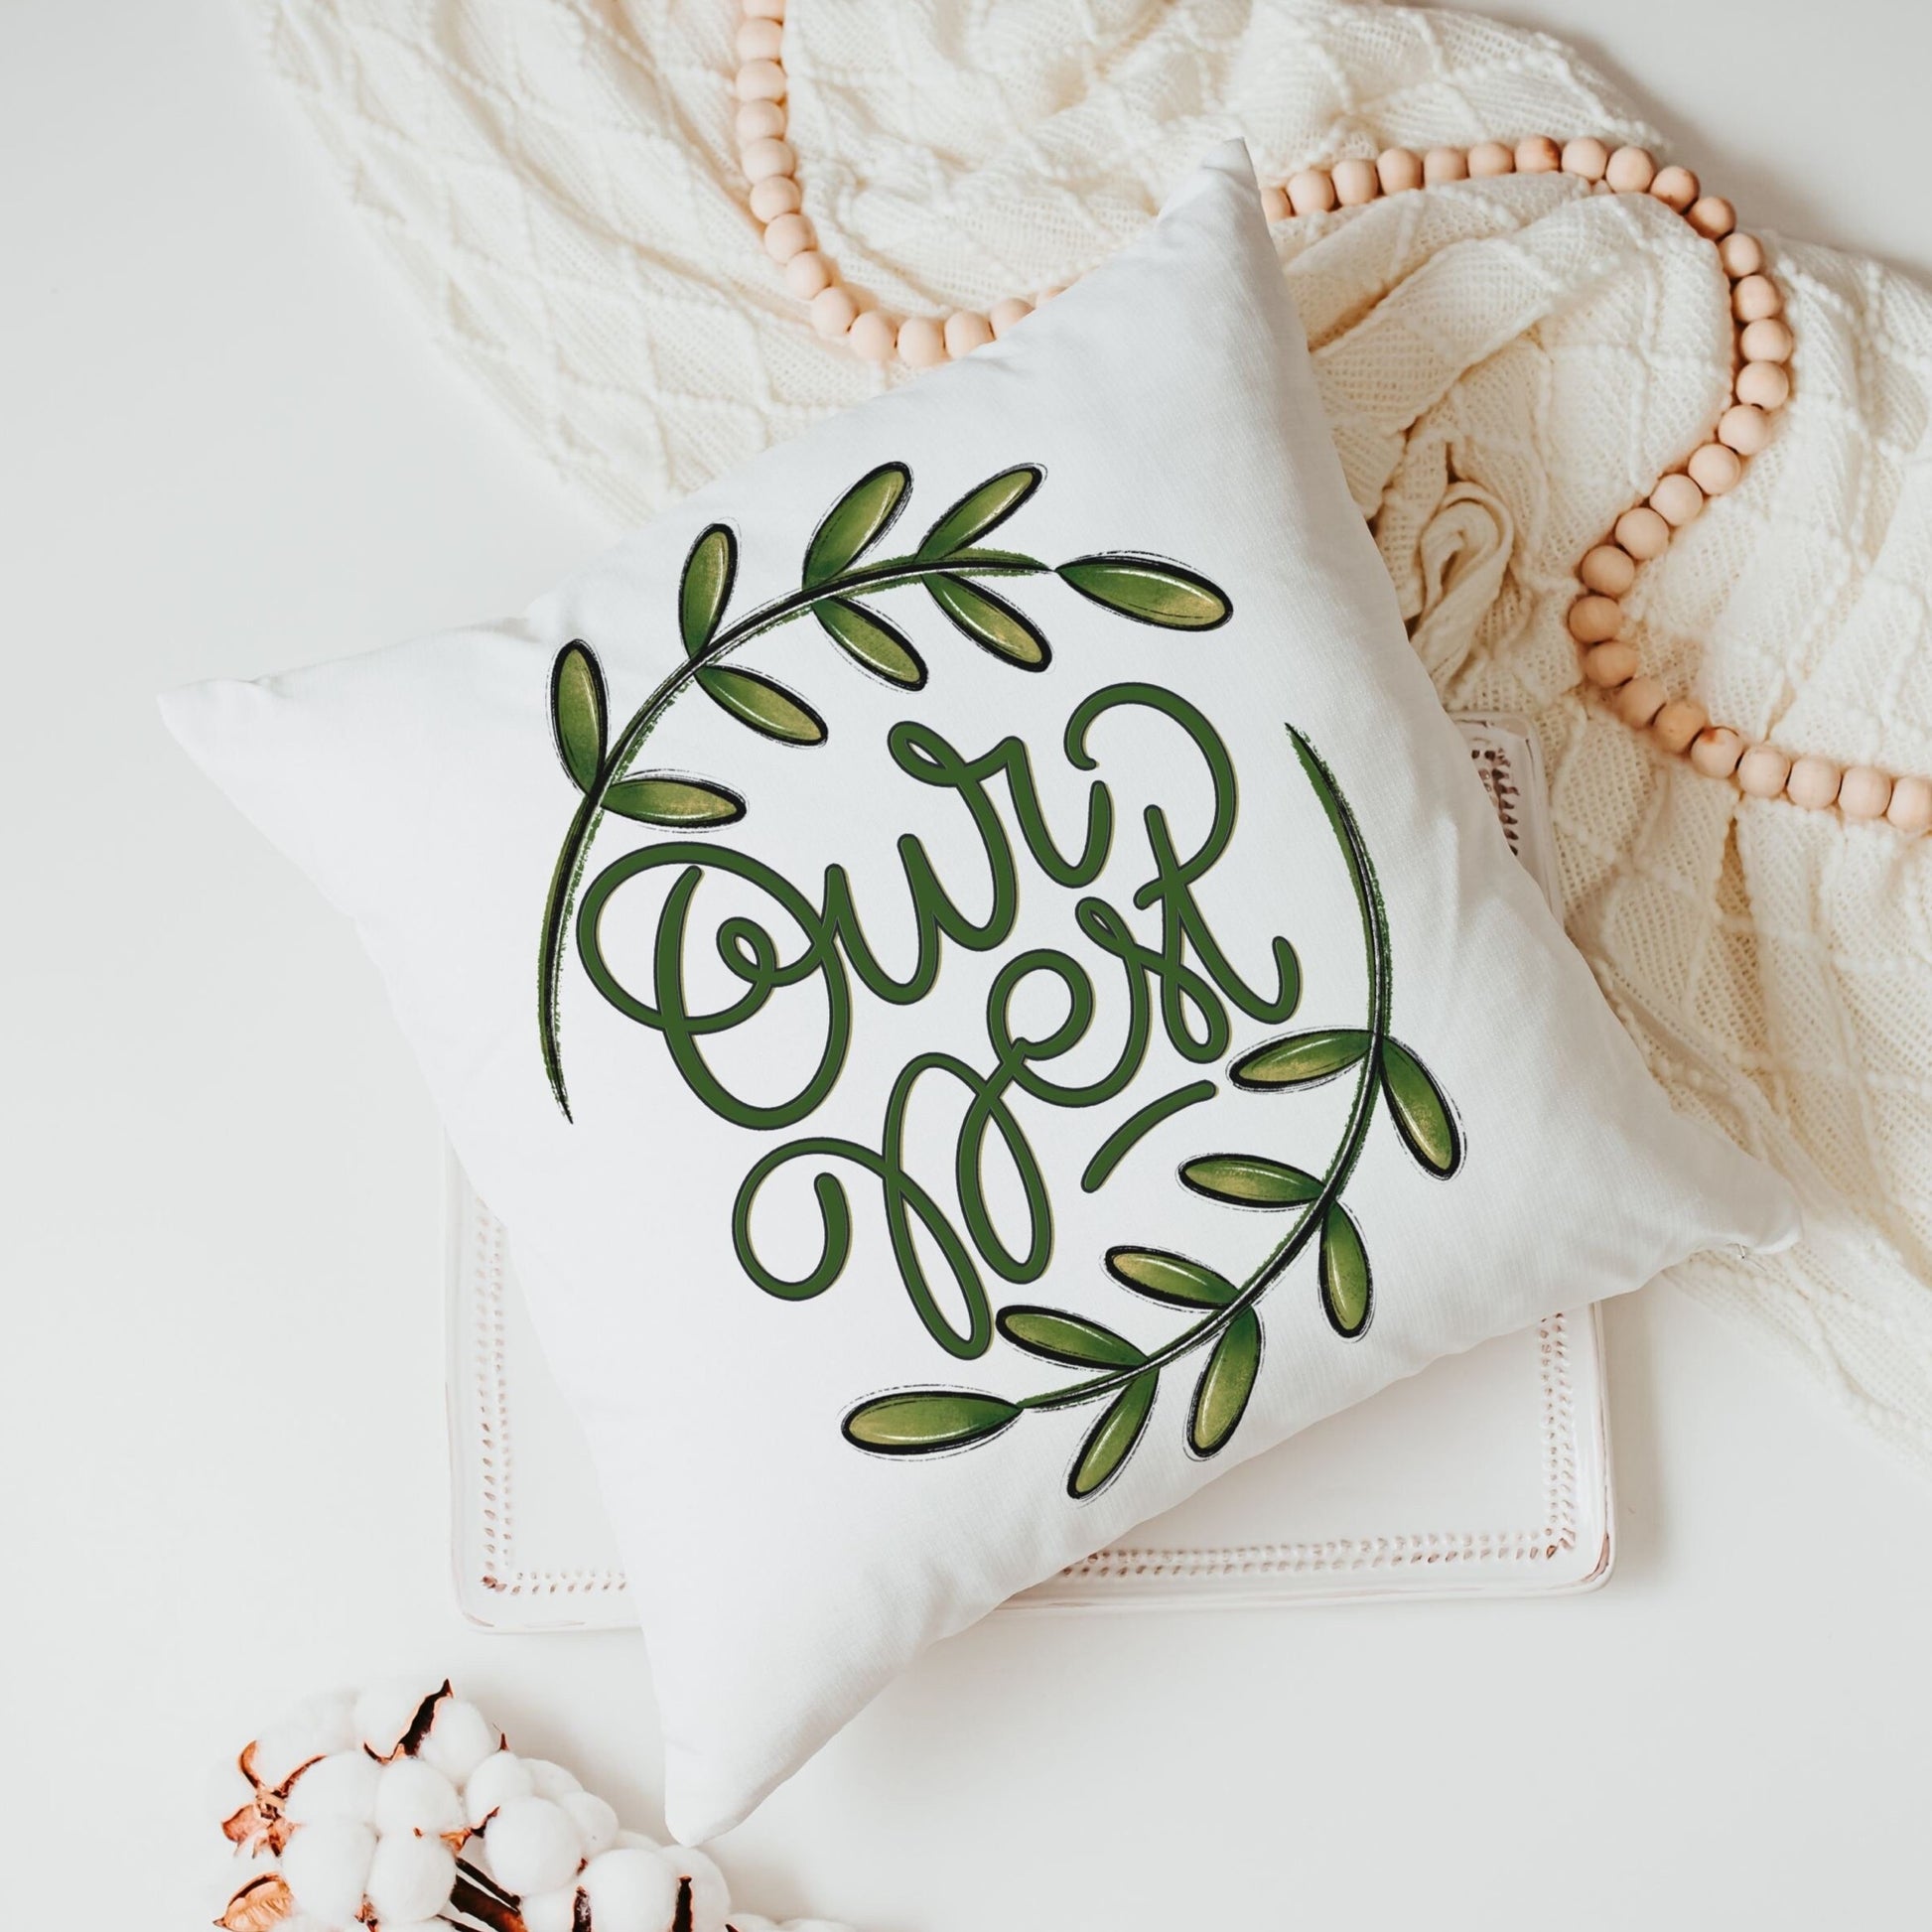 Our Nest Throw Pillow and Towel Gift Set